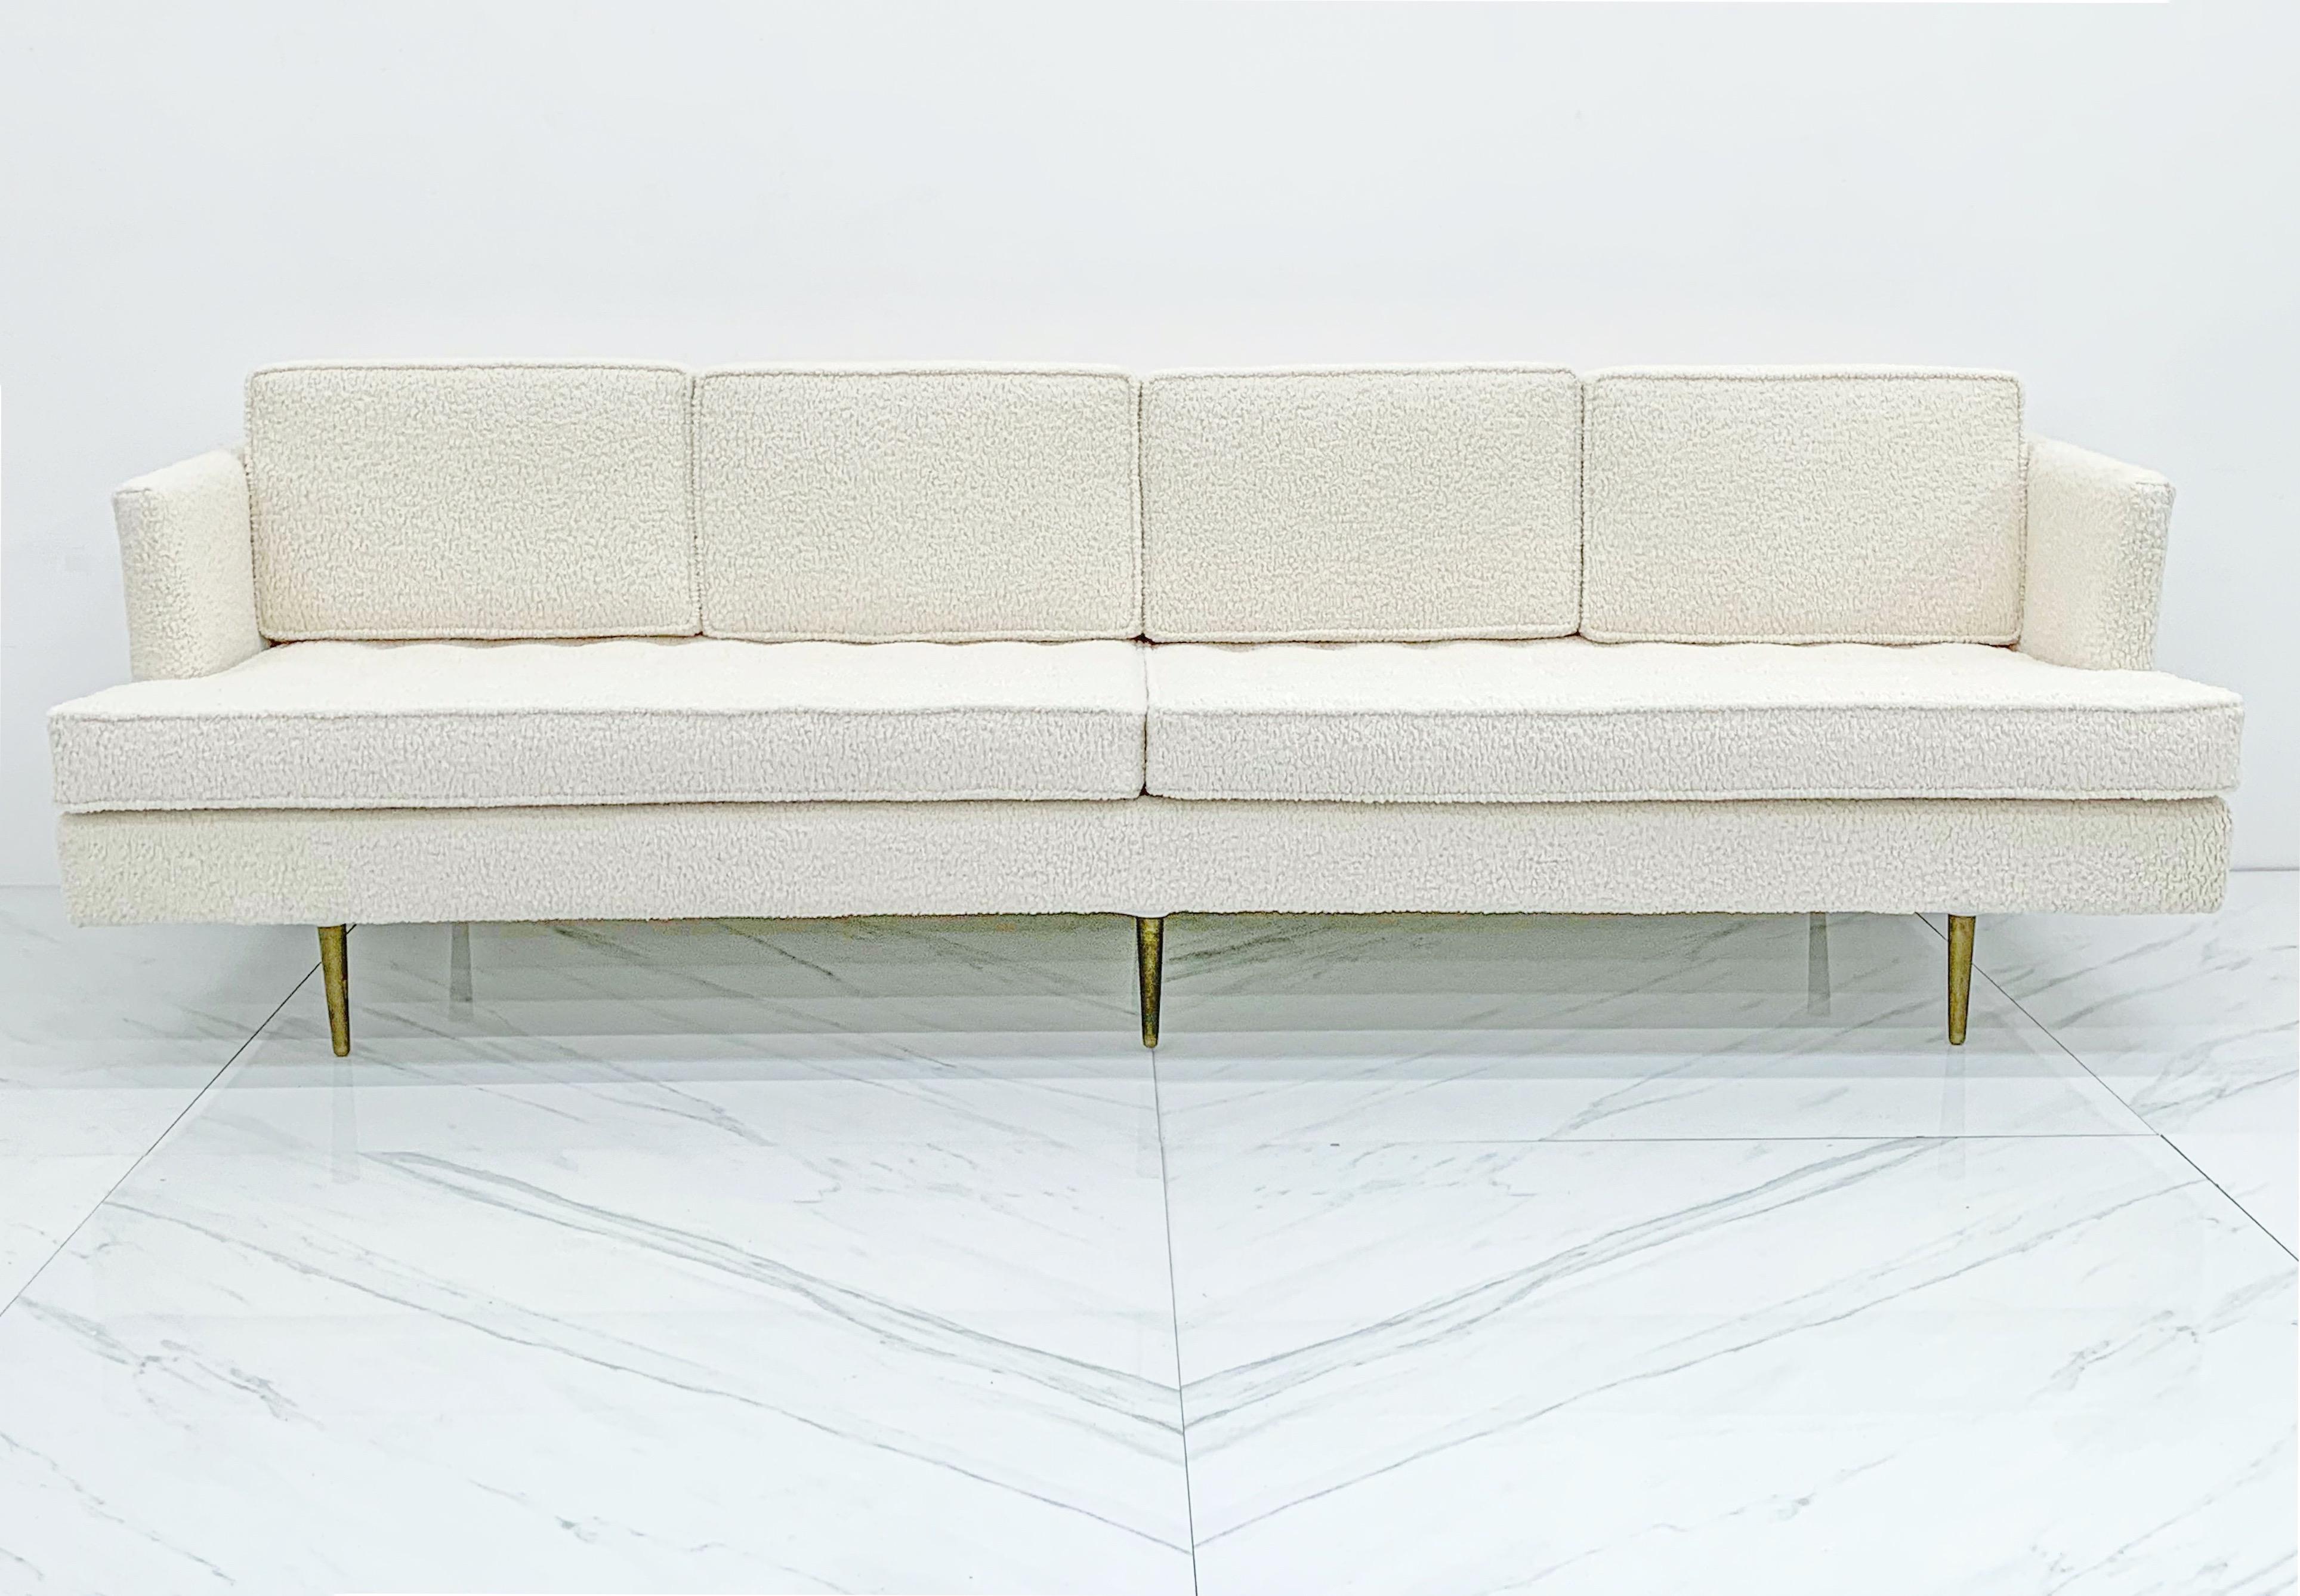 This incredible Model 4906-A four-seat sofa by Edward Wormley for Dunbar features gorgeous reupholstered white bouclé and six of Wormley's signature brass legs. Fine details such as the tufted seat cushions, conical brass legs and classic tuxedo